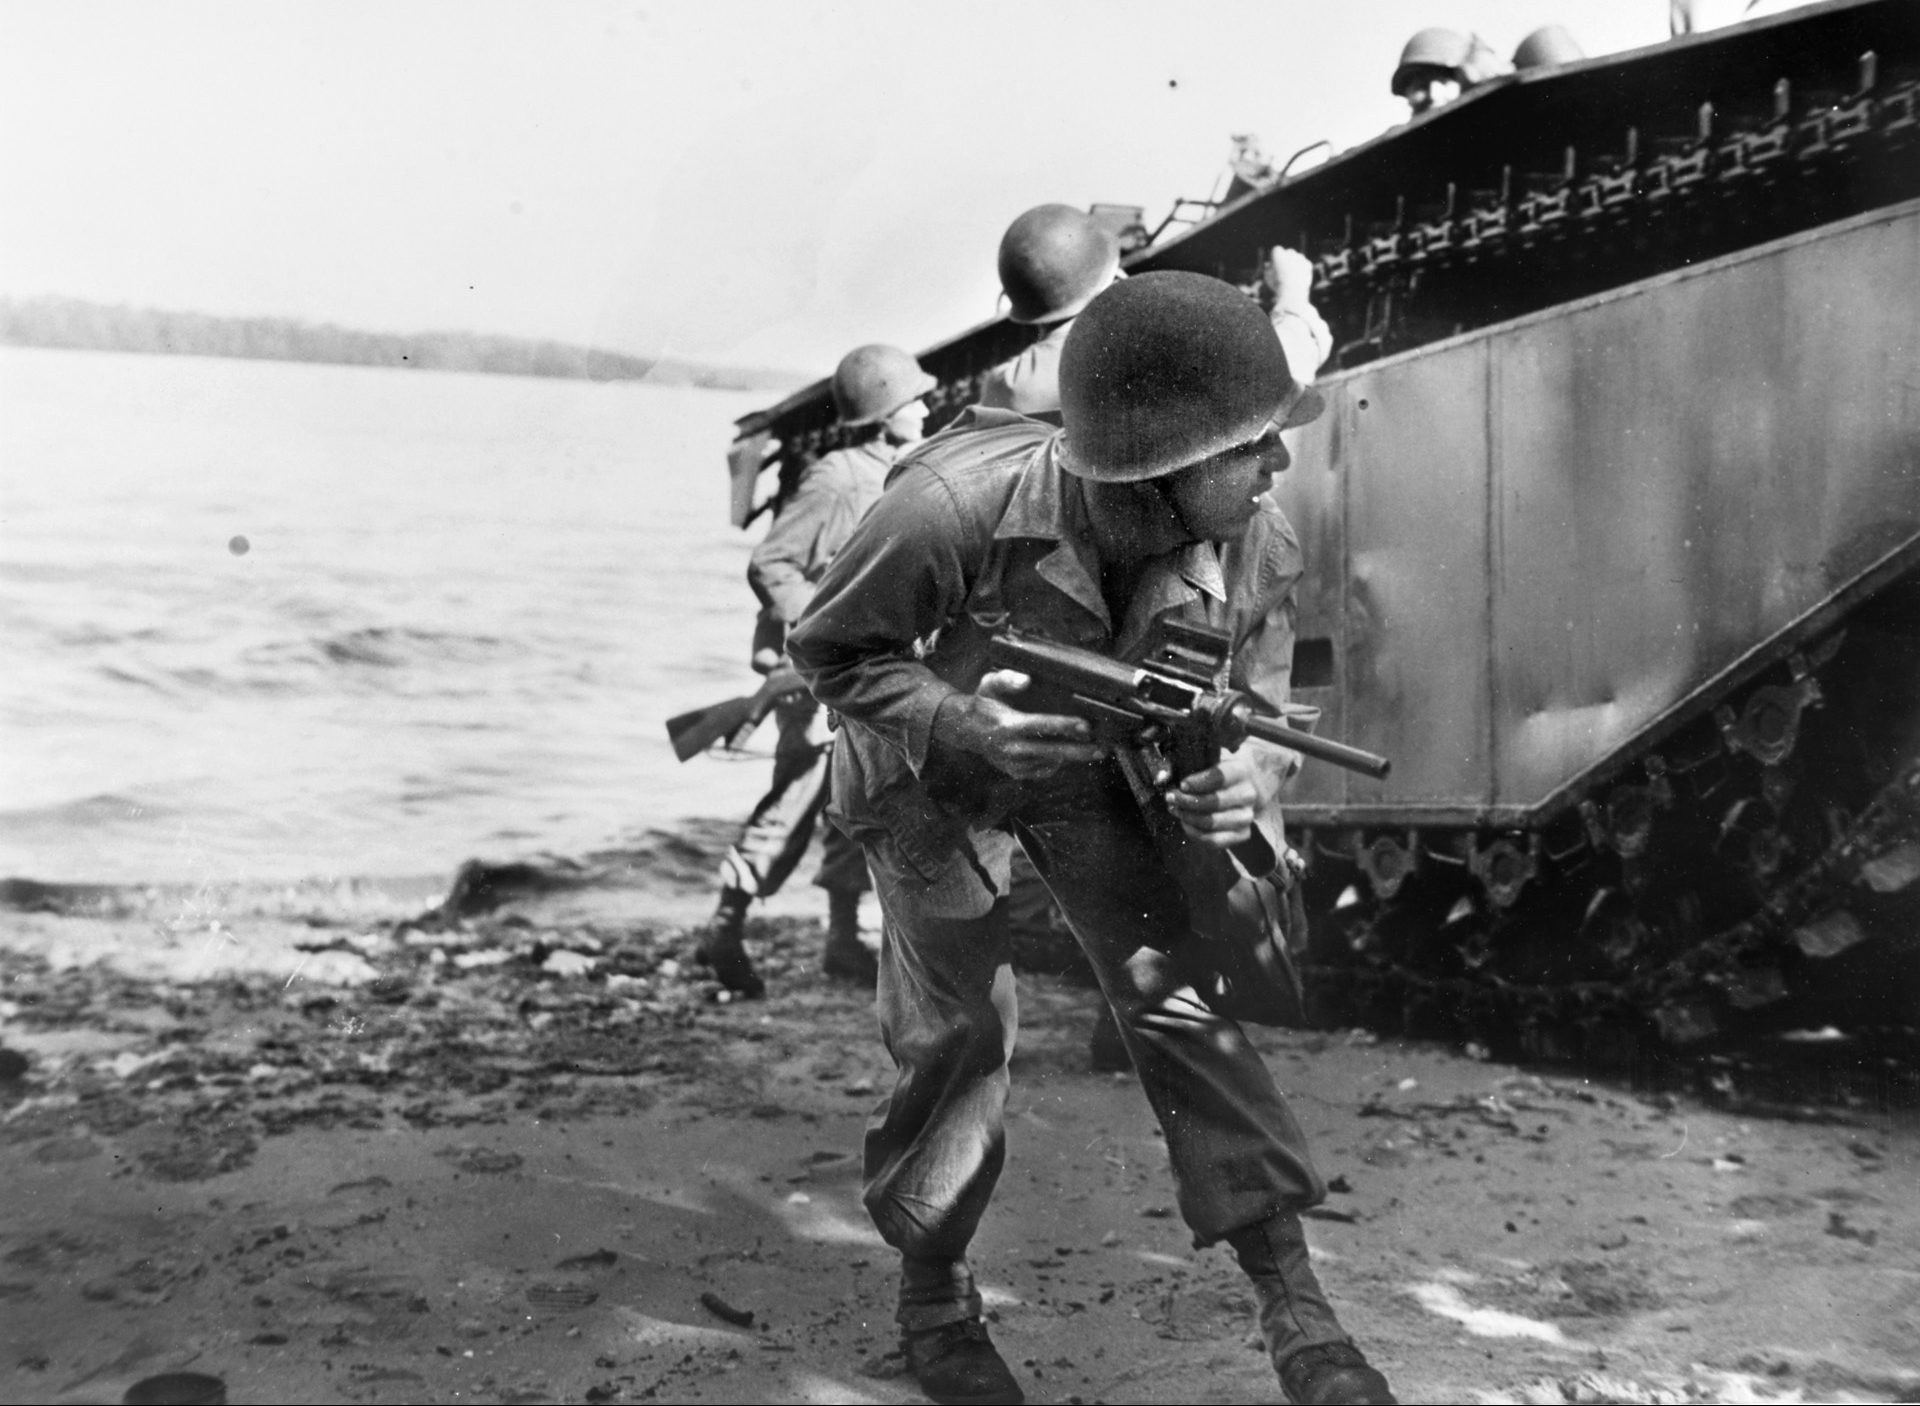 An American soldier of the 31st Infantry Division carries an M3 submachine gun, known as the Grease Gun, during landings on the island of Morotai in the Pacific in September 1944.